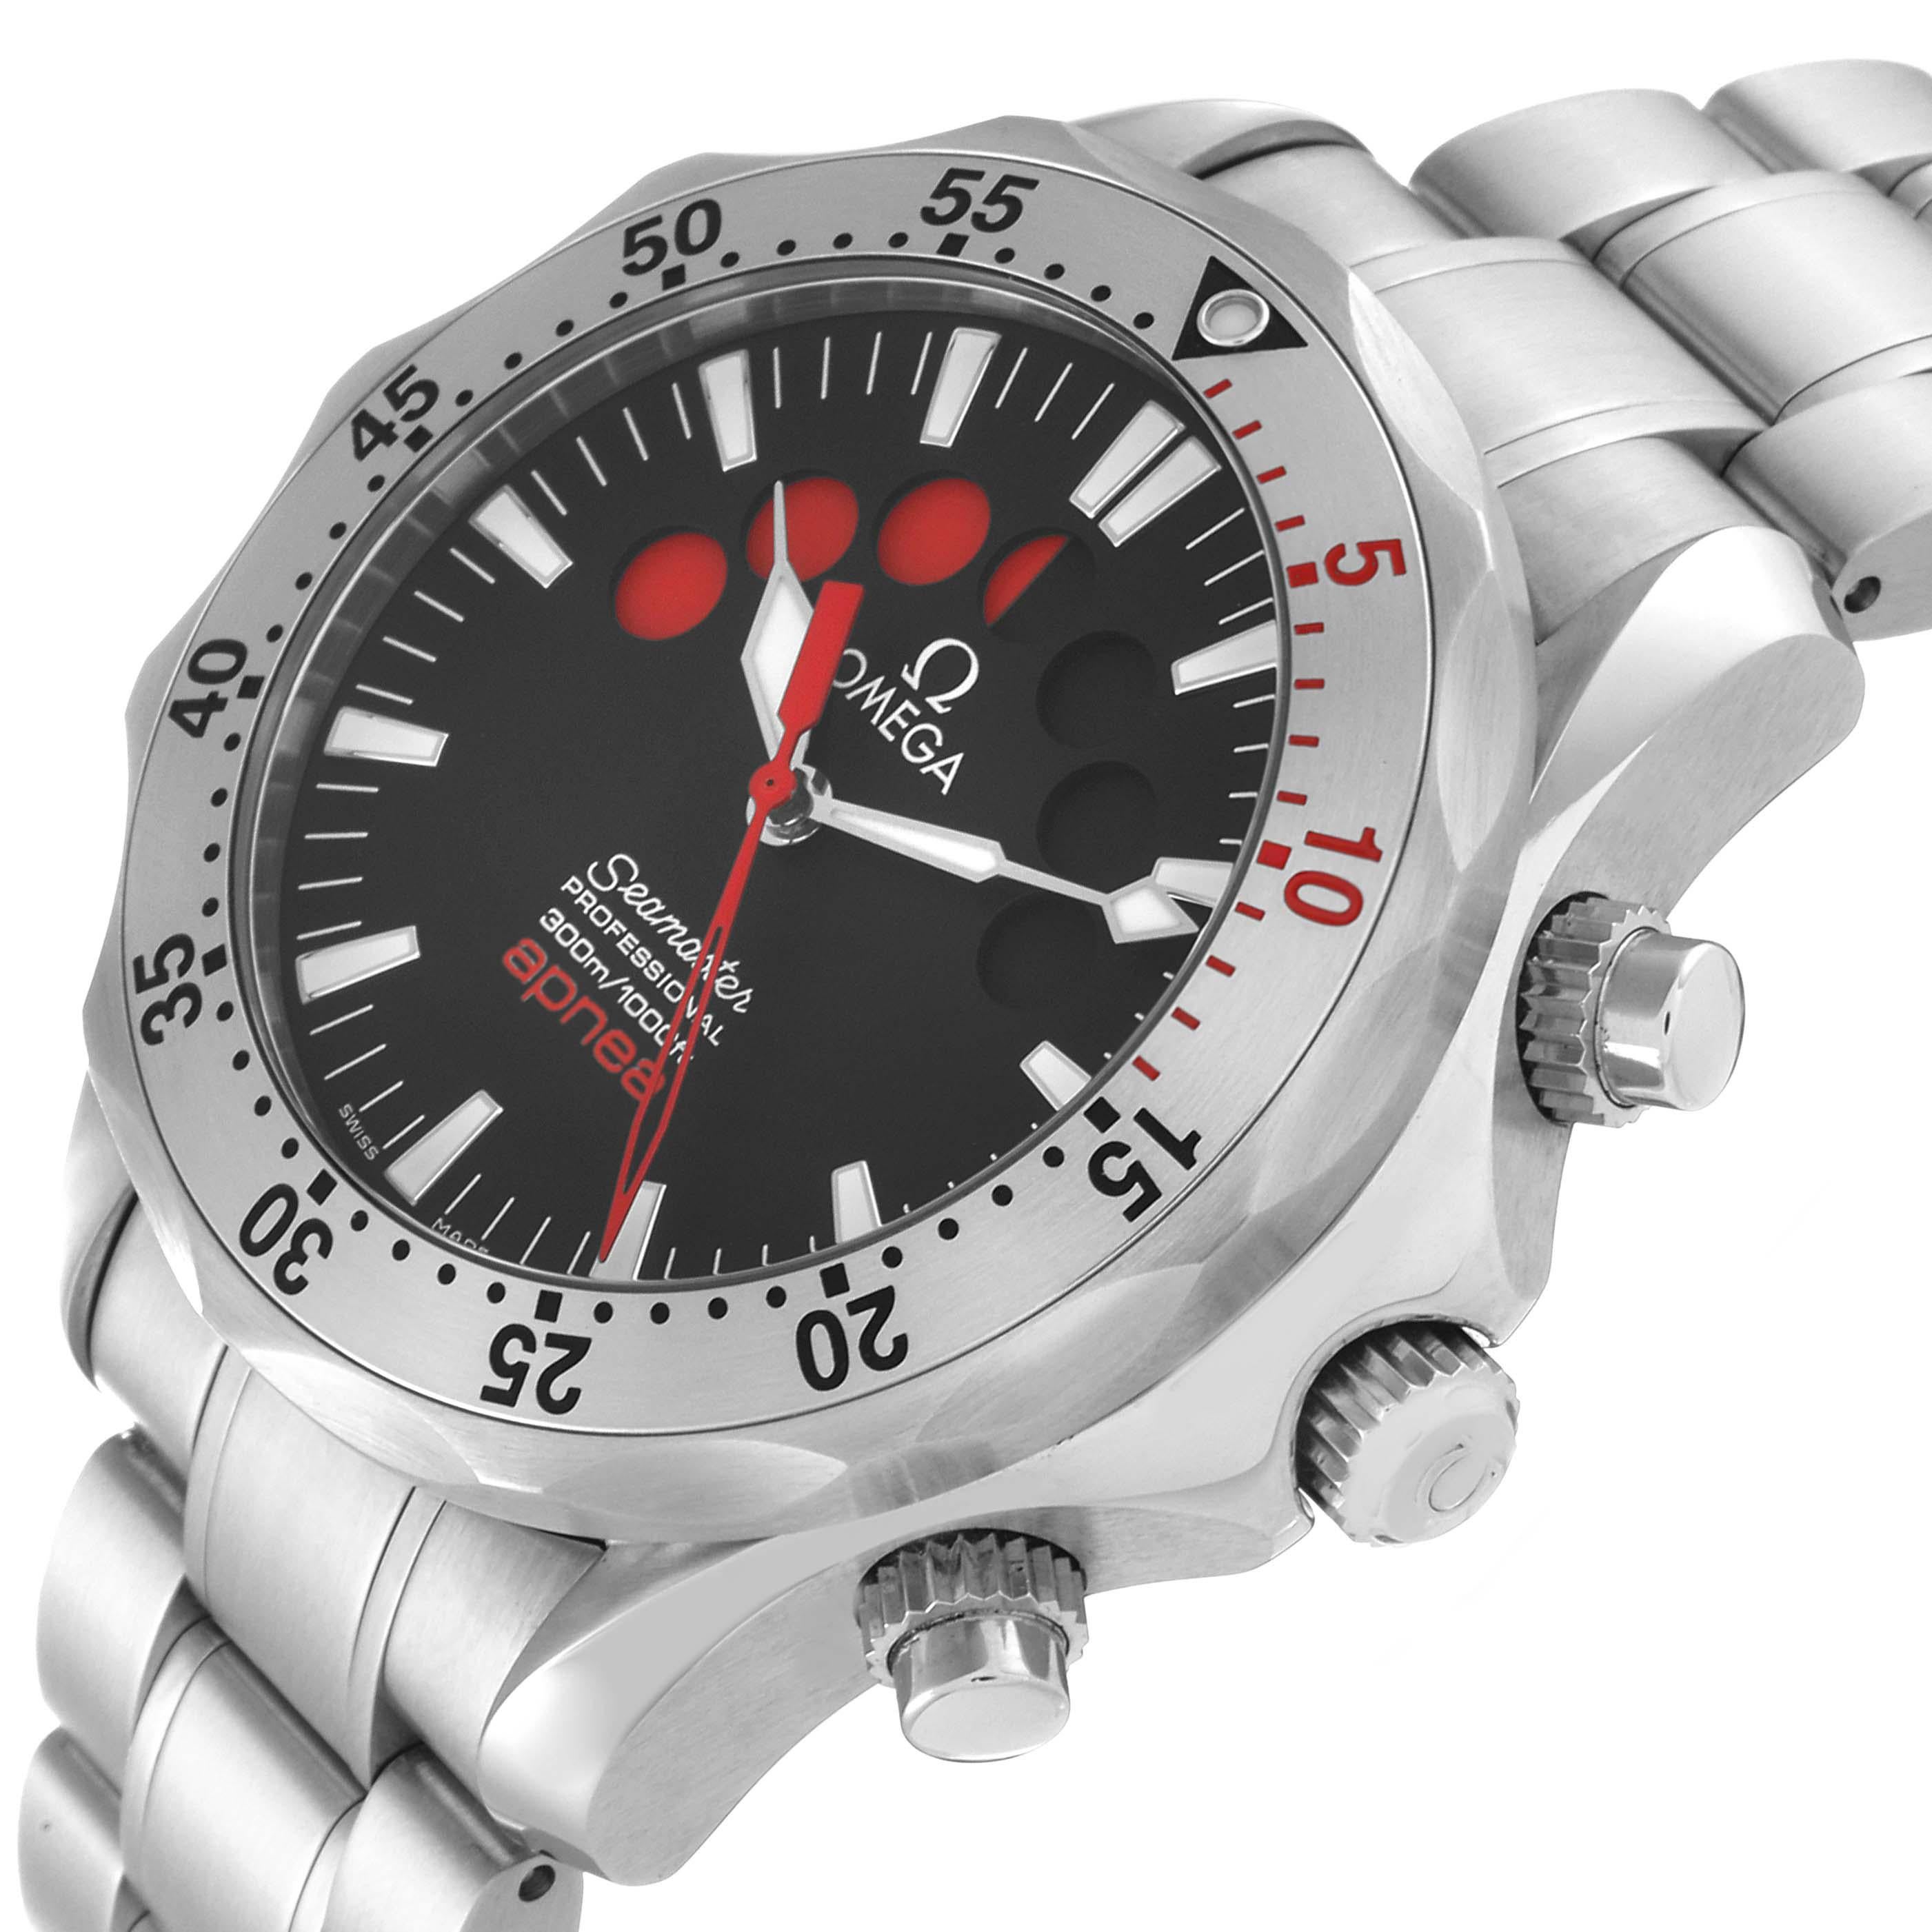 Omega Seamaster Apnea Jacques Mayol Steel Mens Watch 2595.50.00 Box Card. Automatic self-winding movement. Stainless steel case 42.0 mm in diameter. Omega logo on a crown. 'Jacques Mayol' engraved on case back. Unidirectional rotating stainless